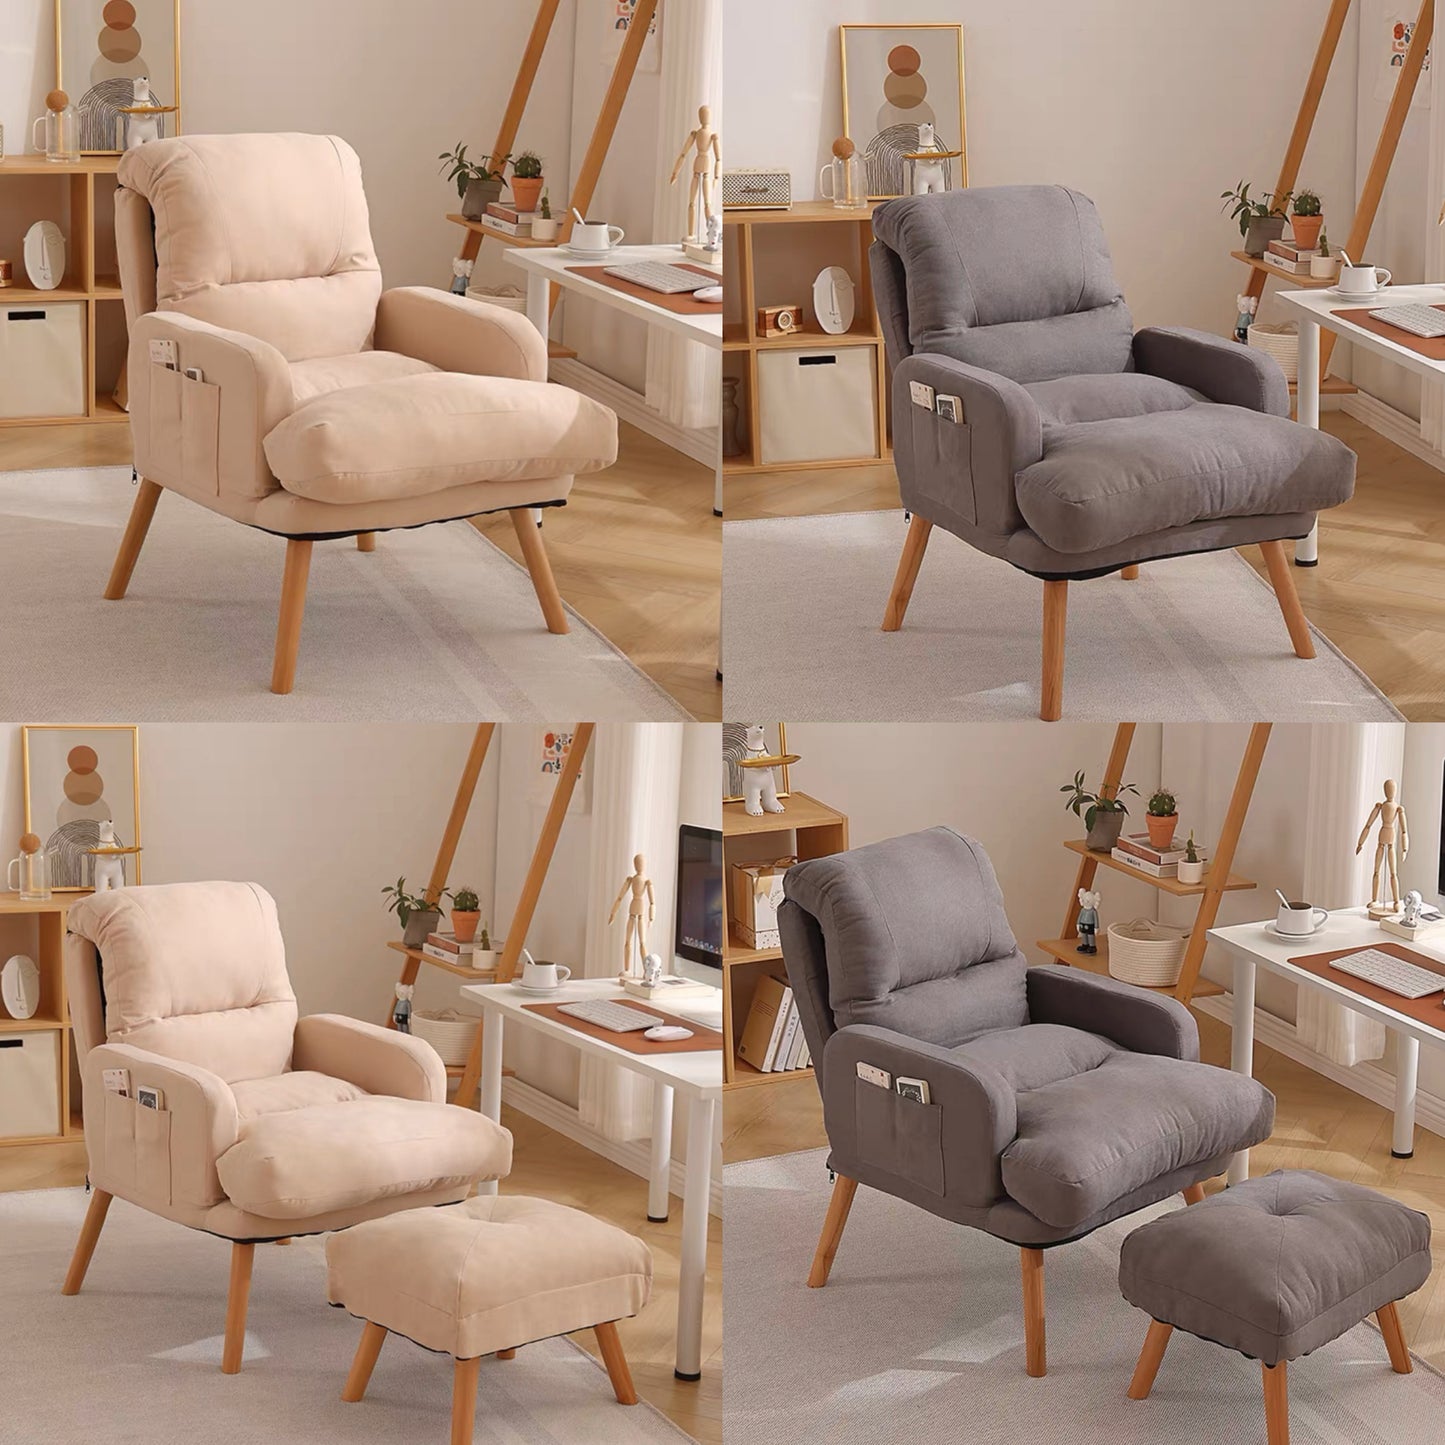 COSON lounge chair 